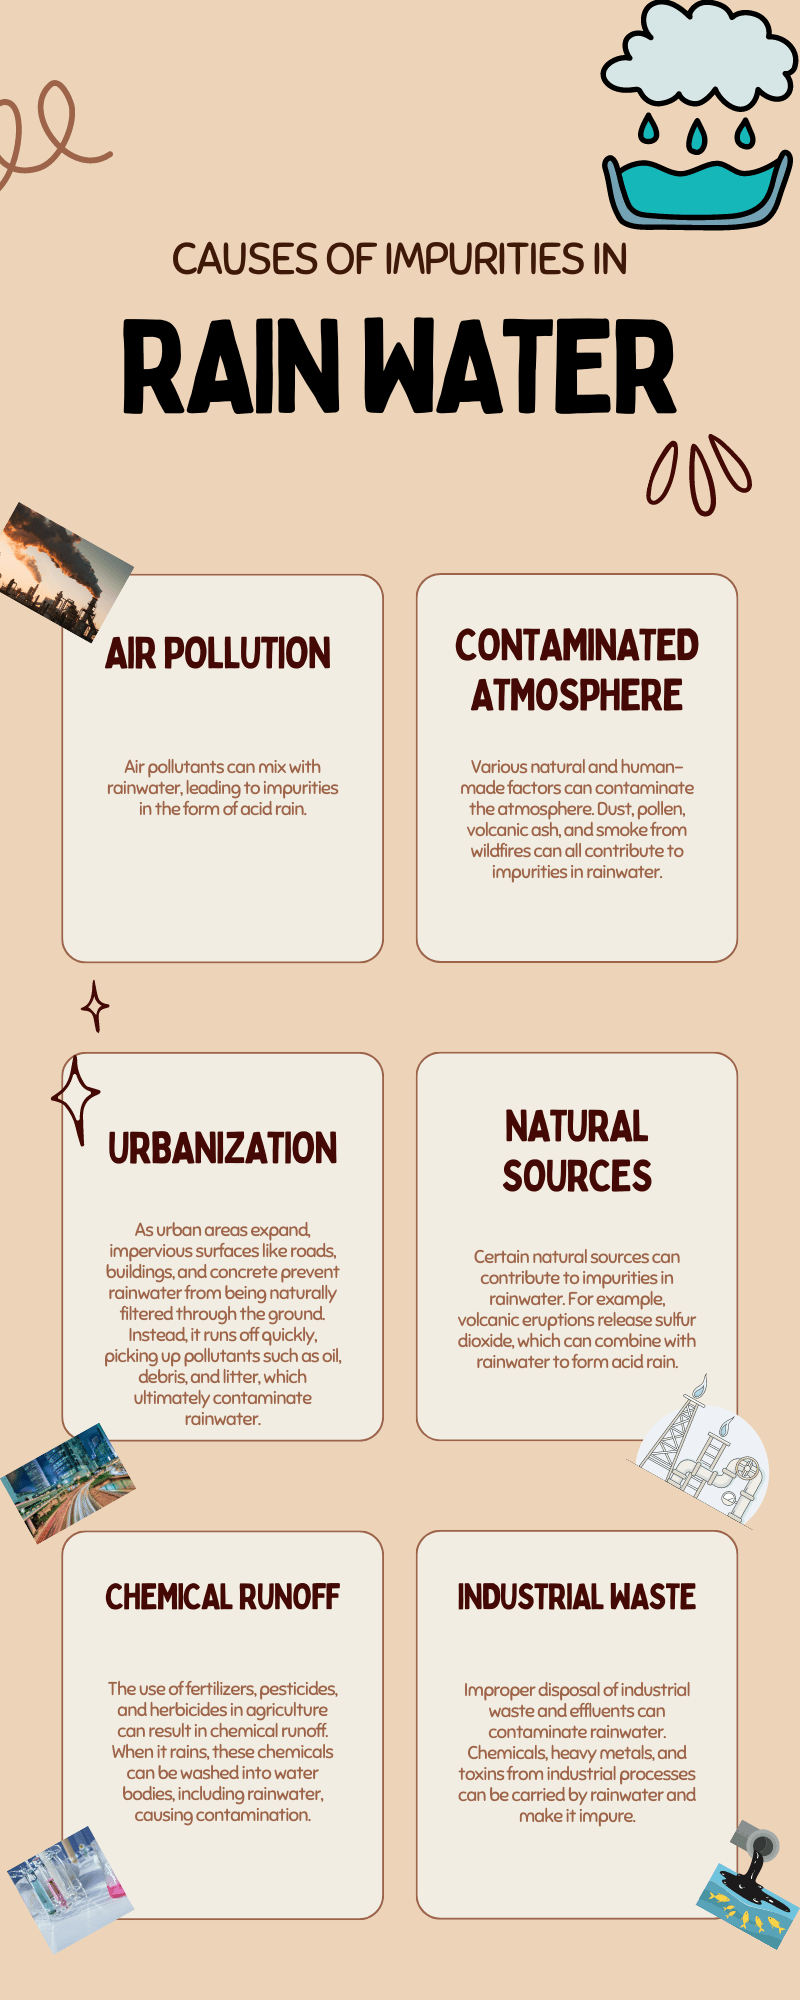 caused of impuities in rain water - infographic